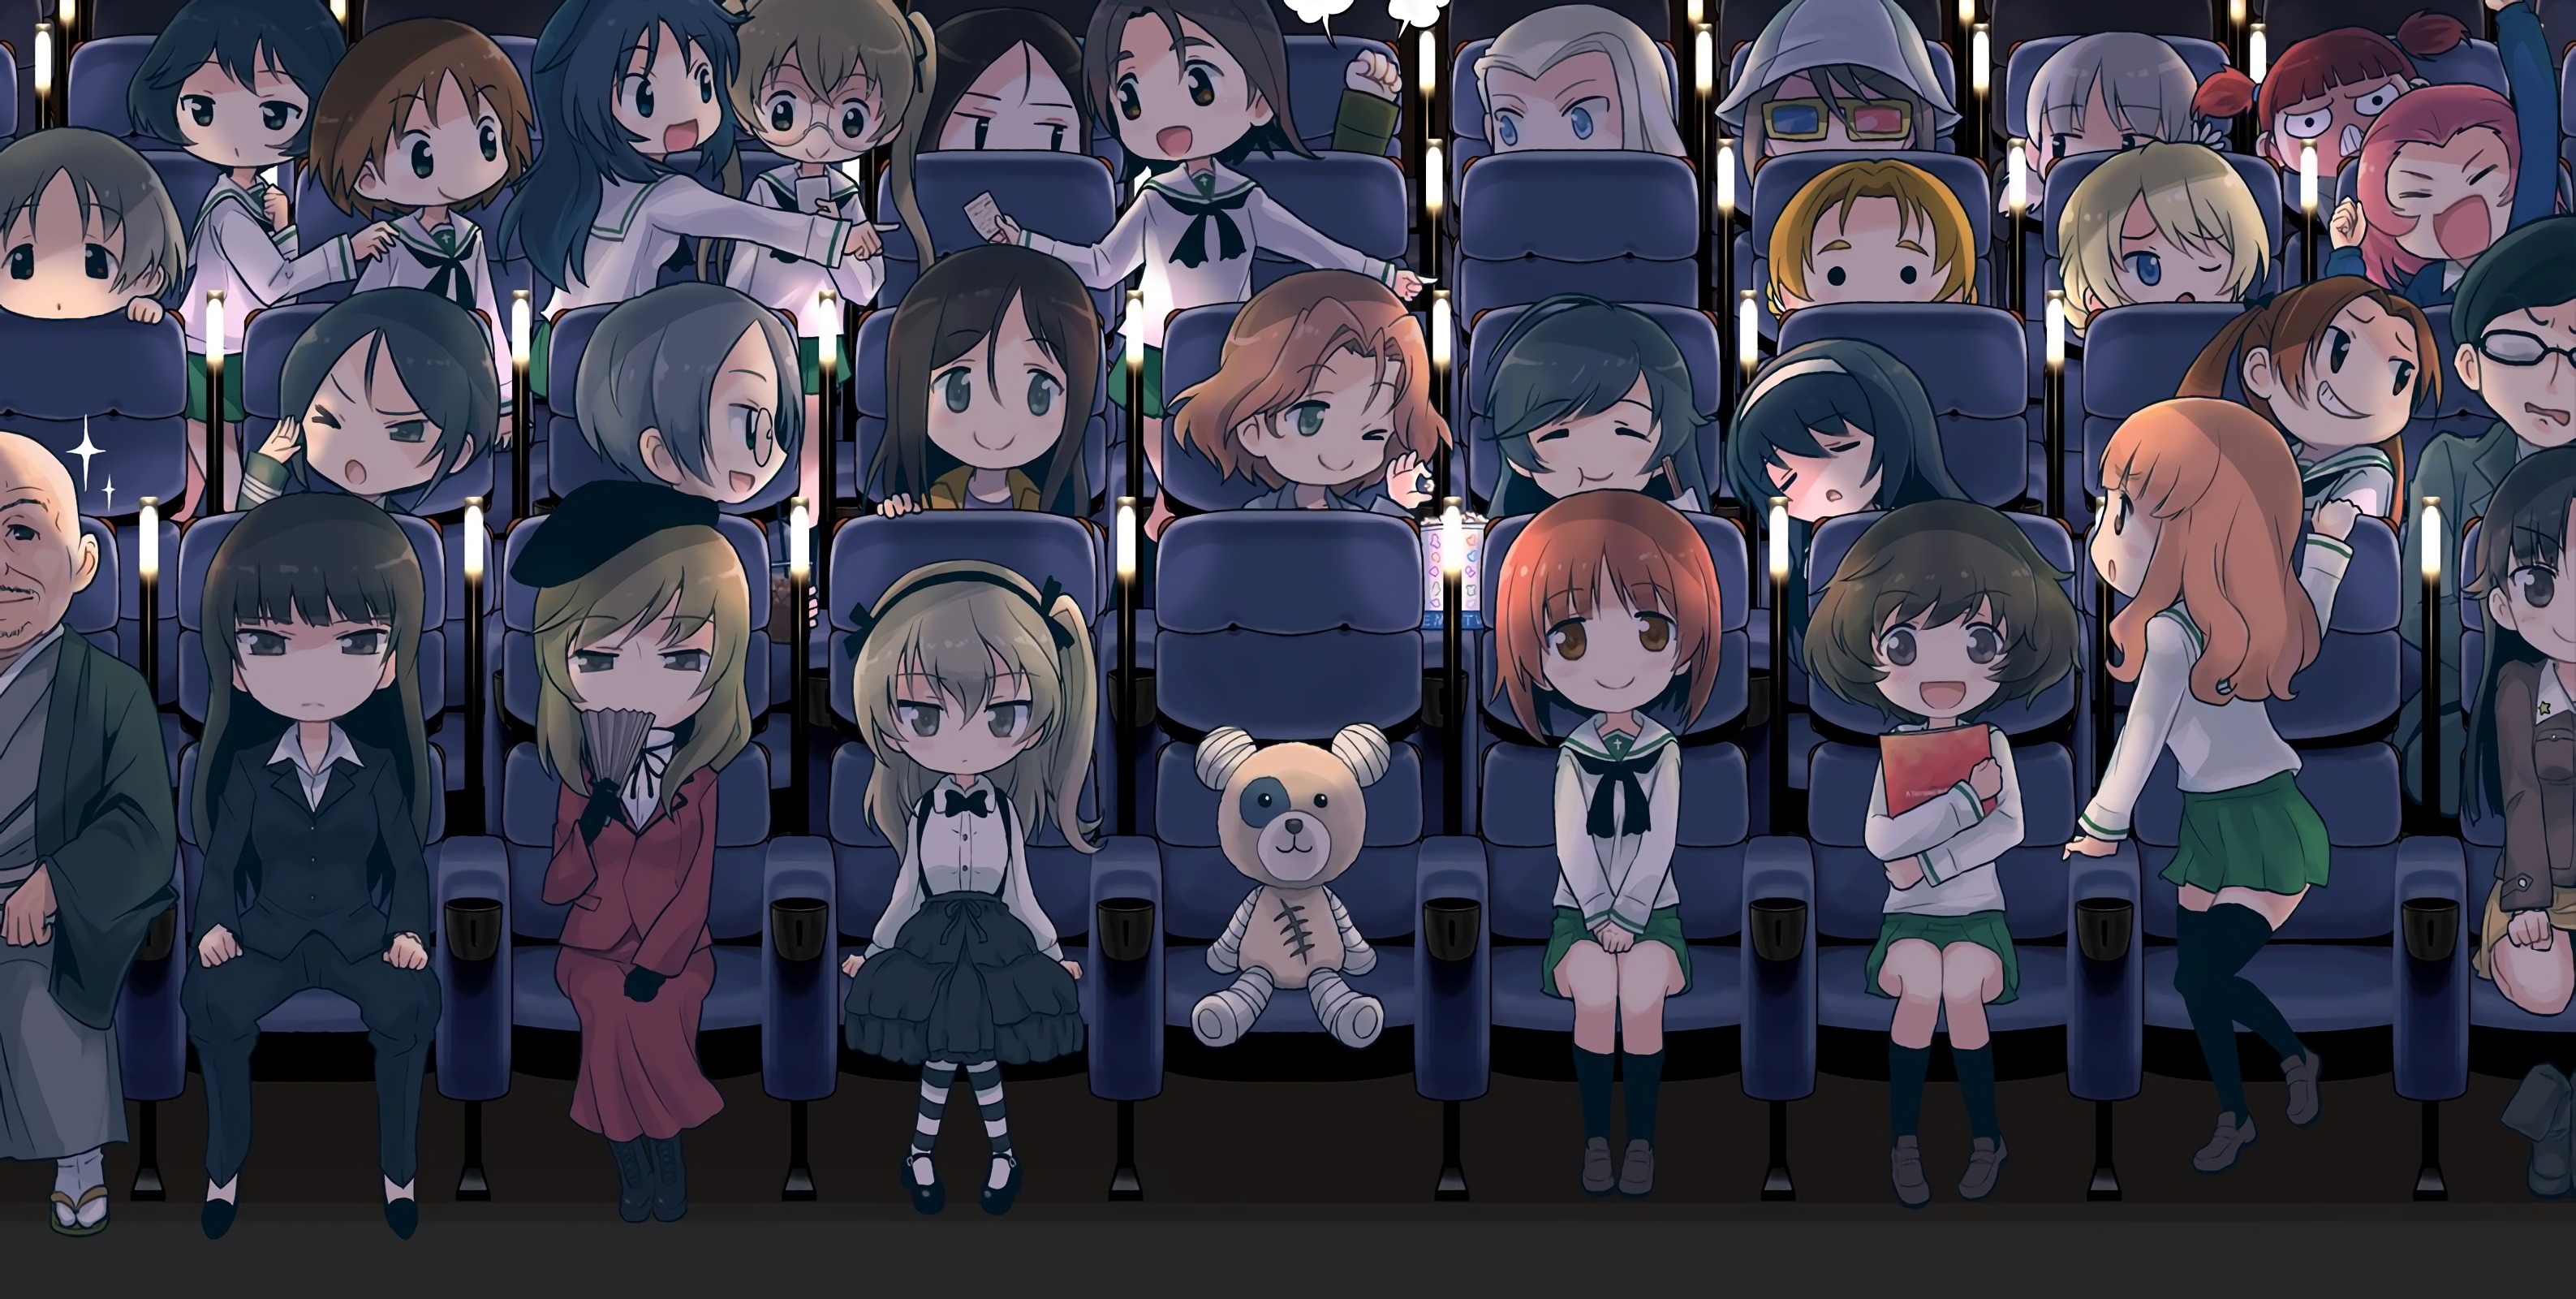 A picture of the Girls und Panzer characters sitting in a theatre, facing the viewer.